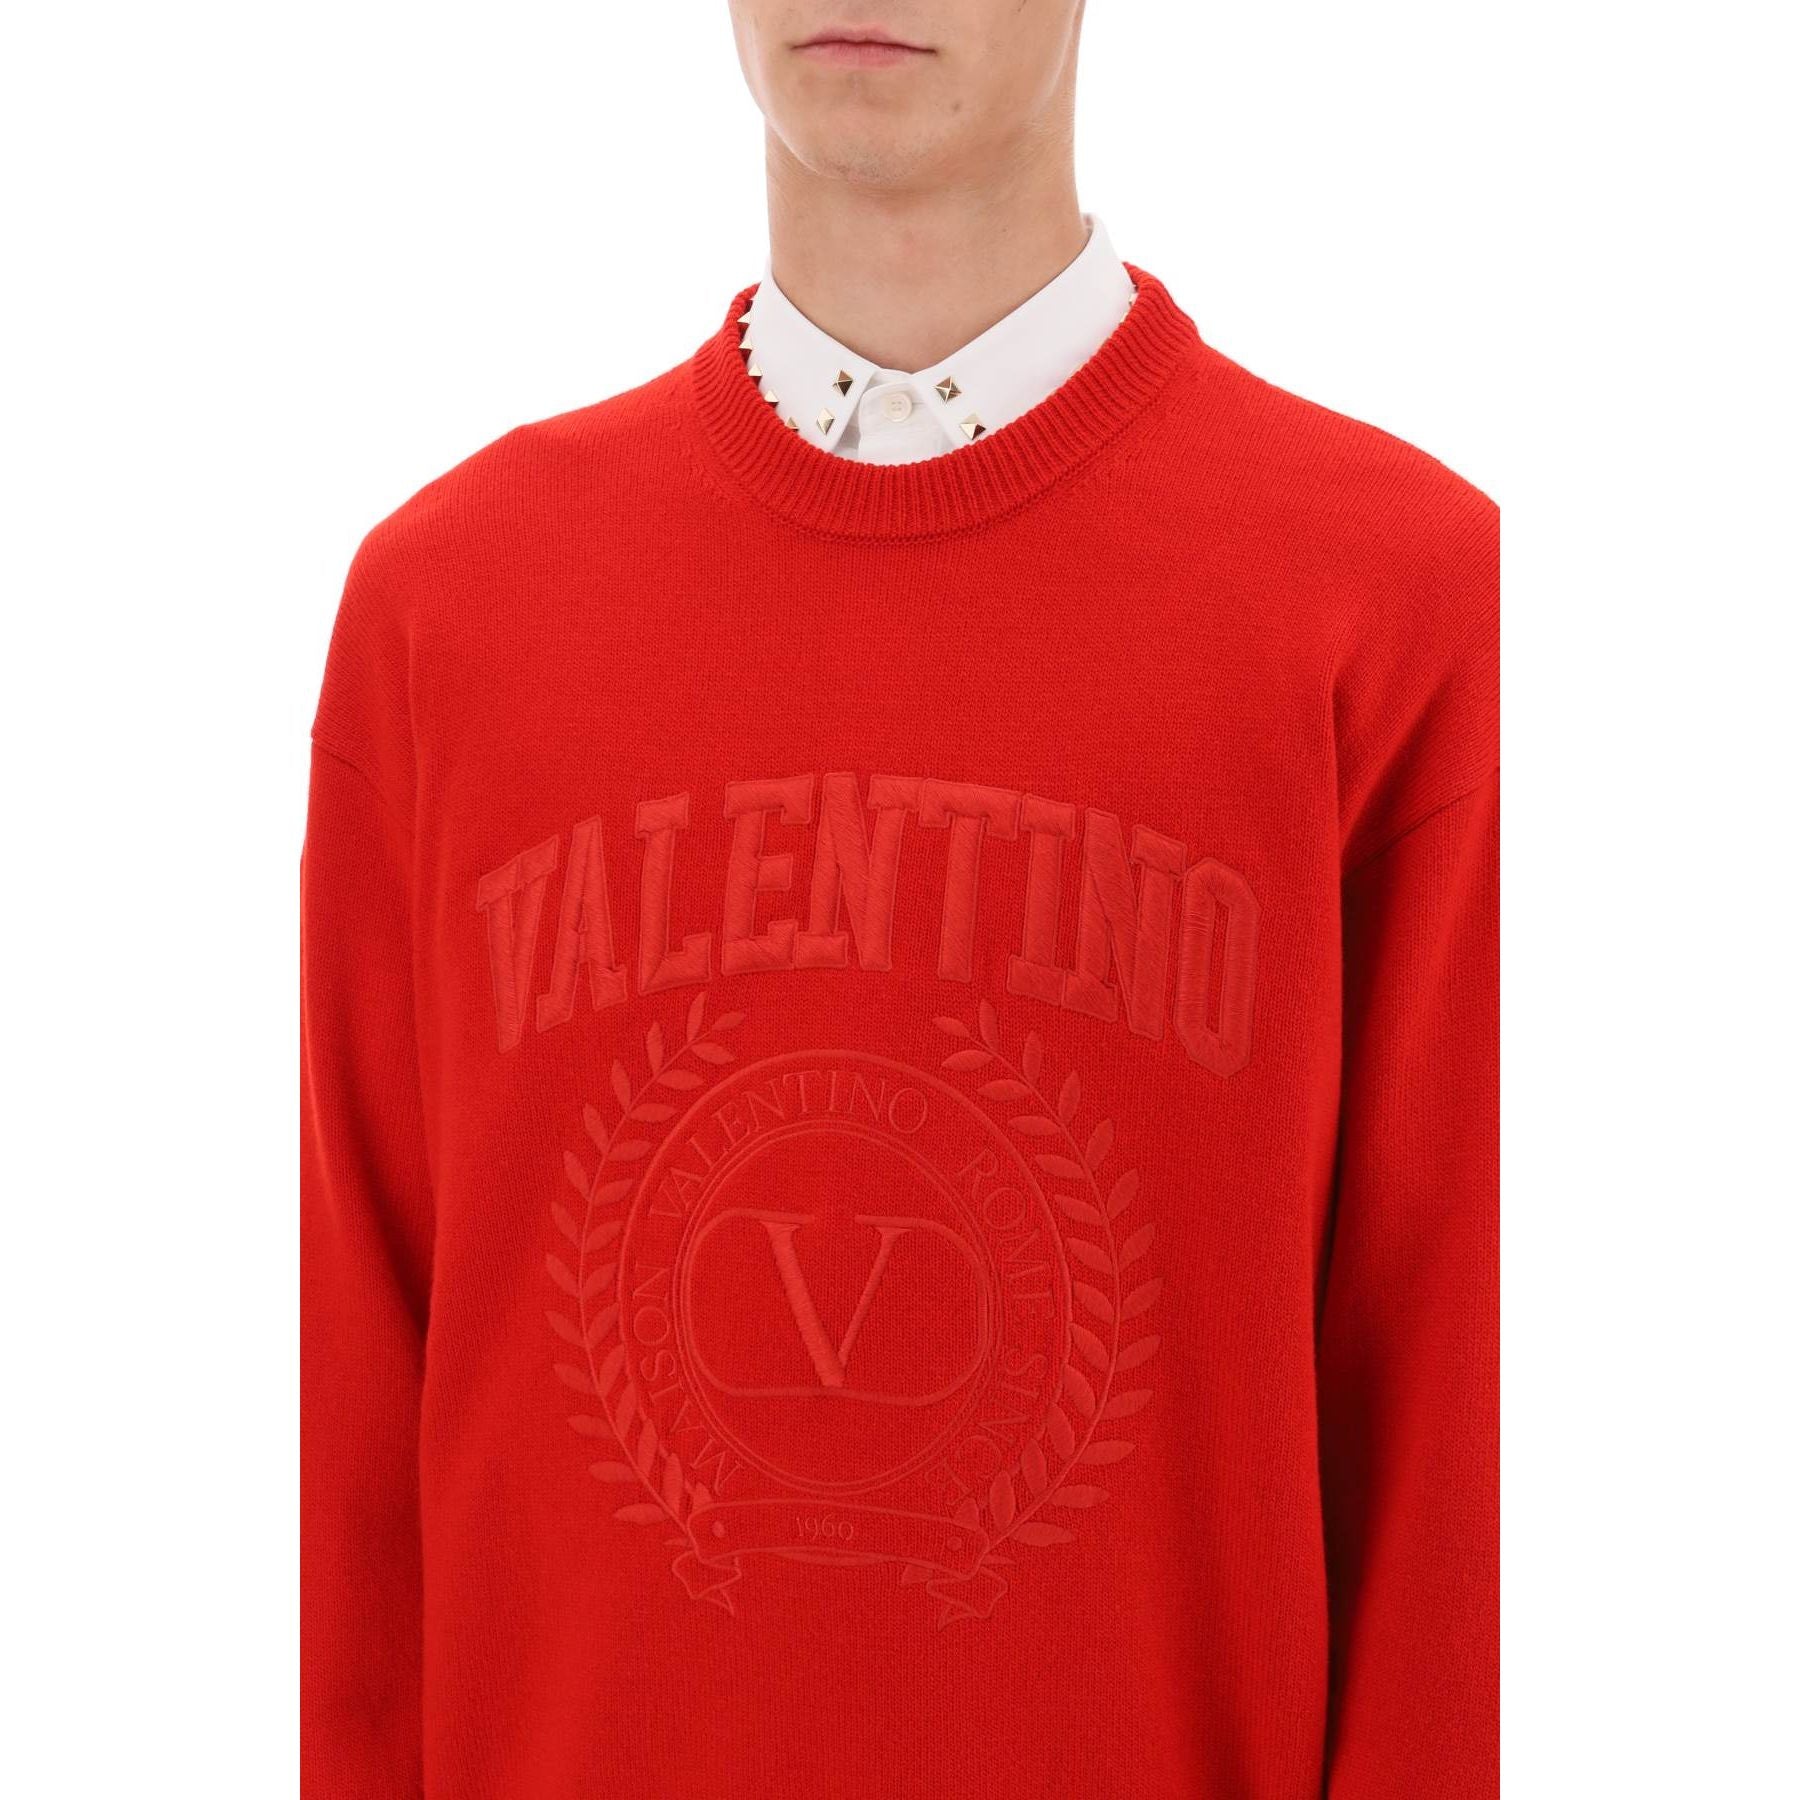 Crew Neck Sweater With Maison Valentino Embroidery